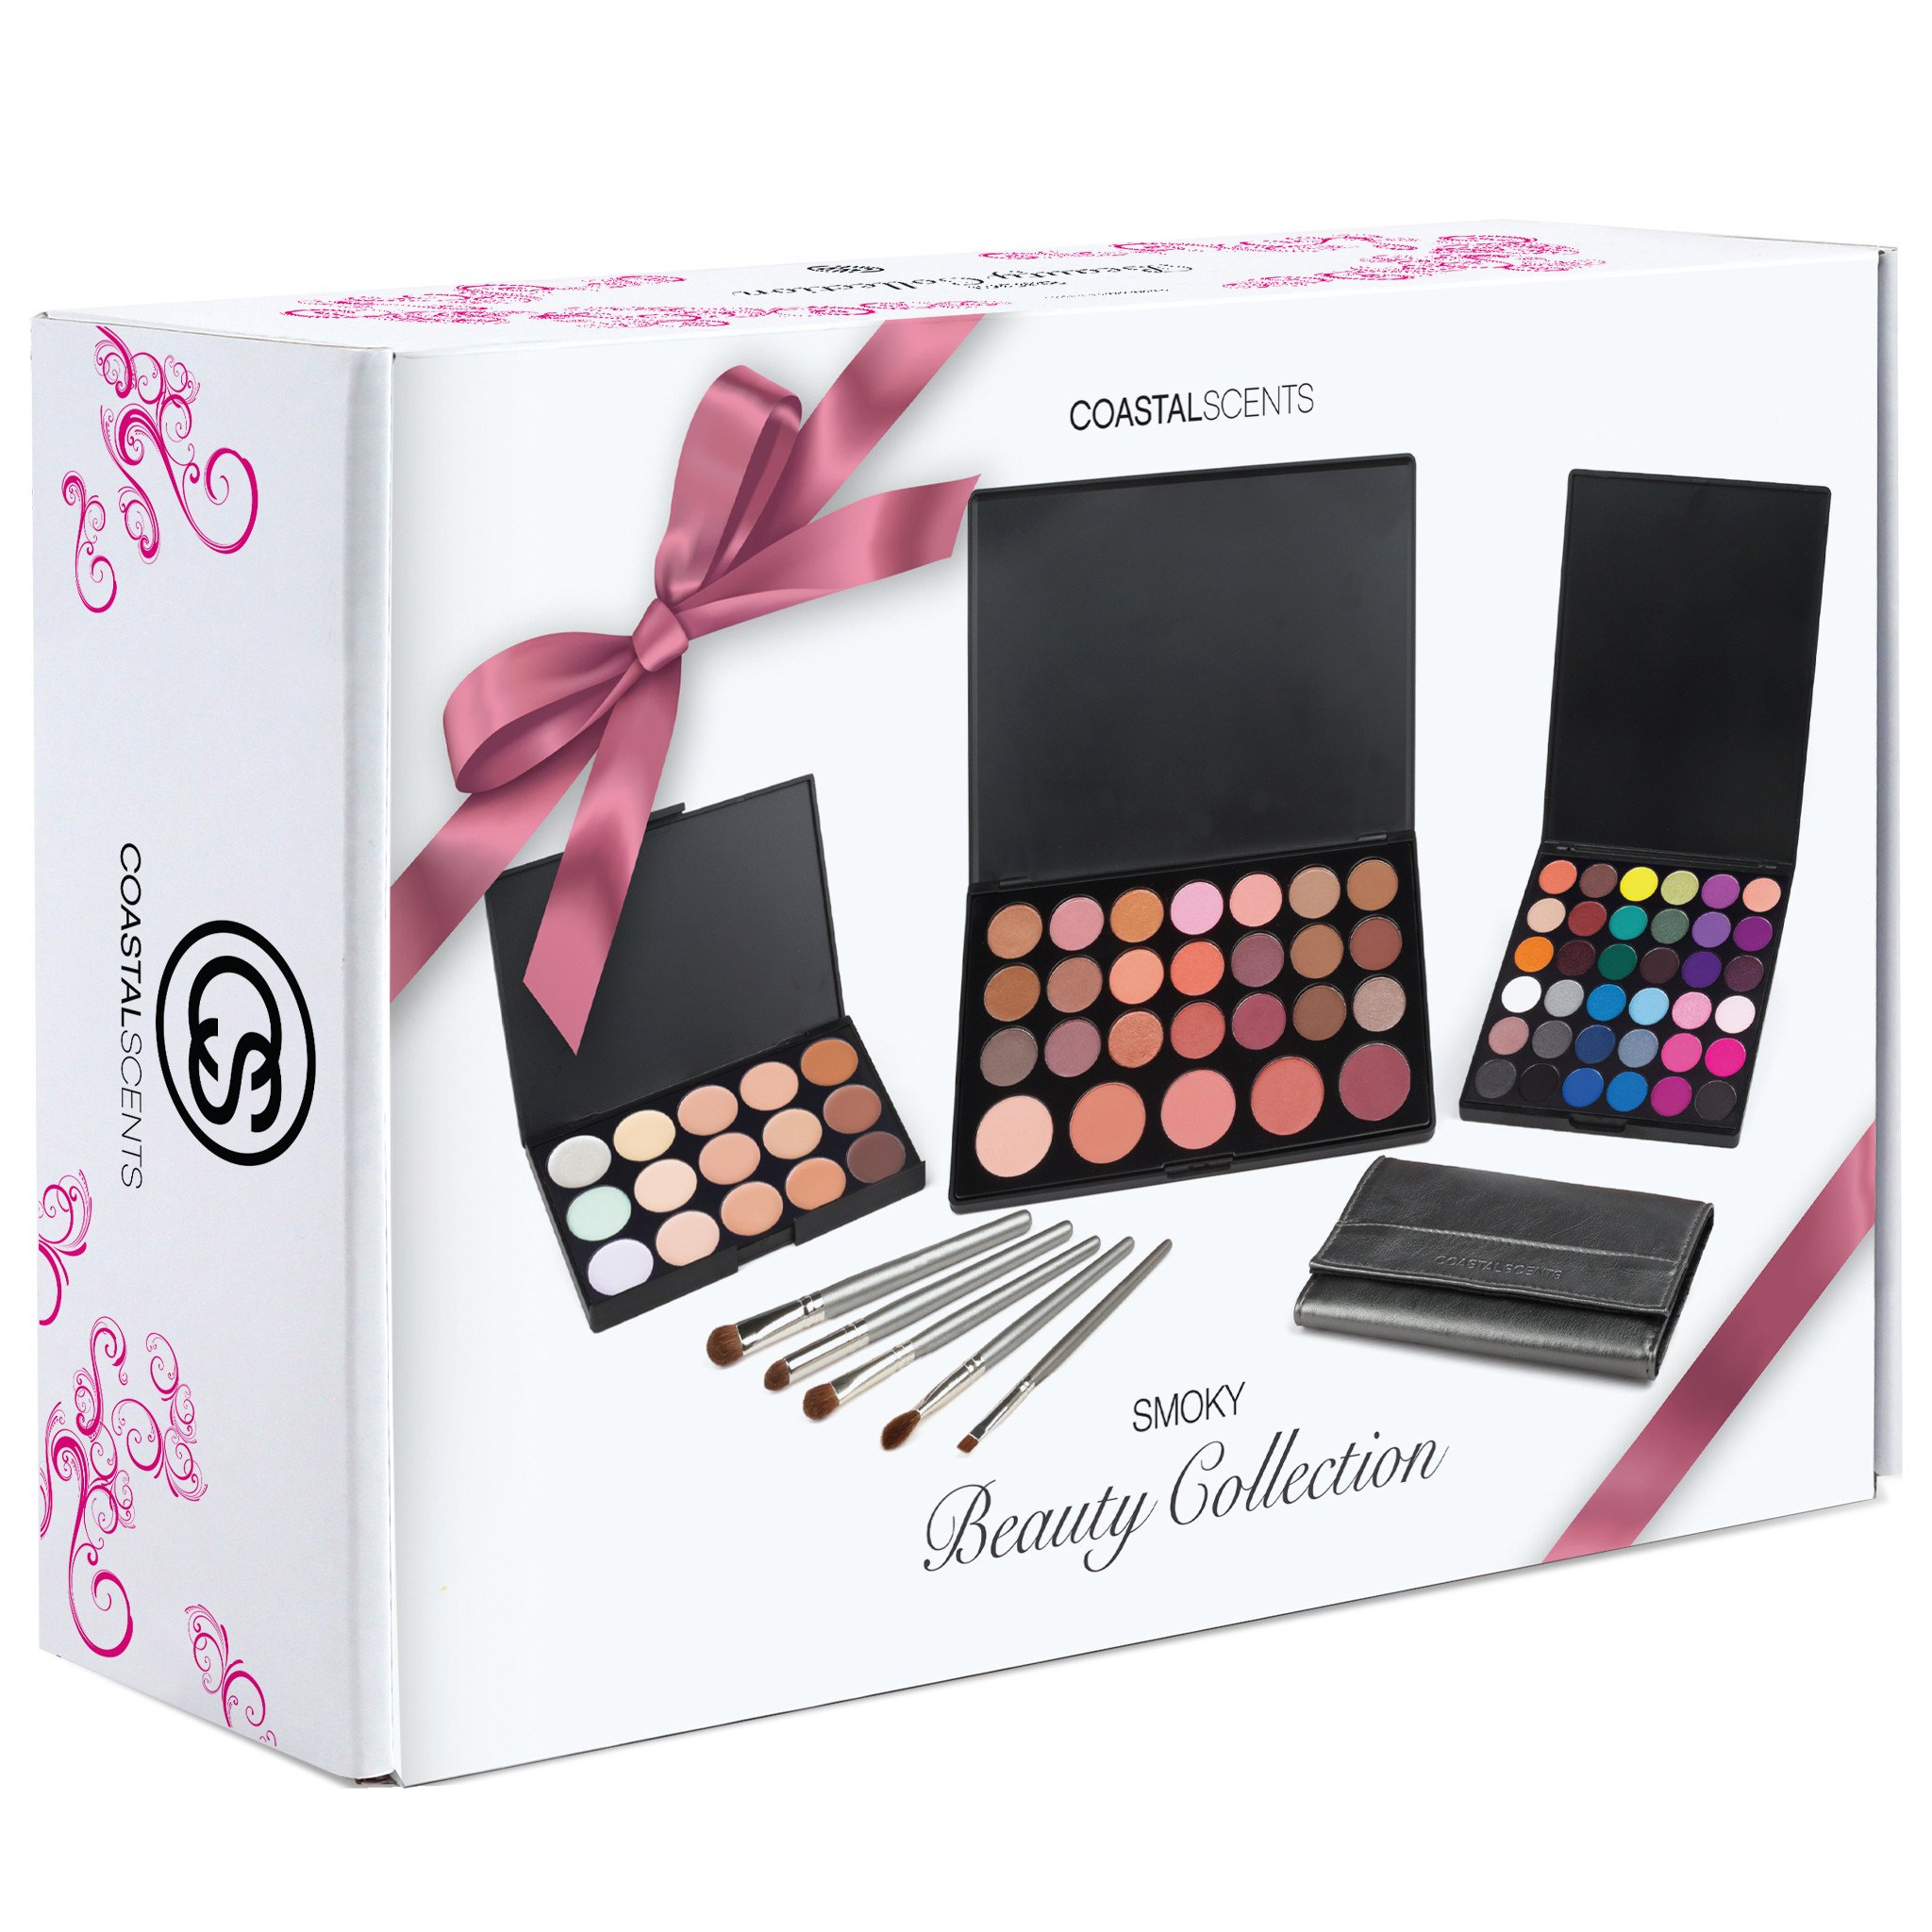 Smoky Beauty Collection Image